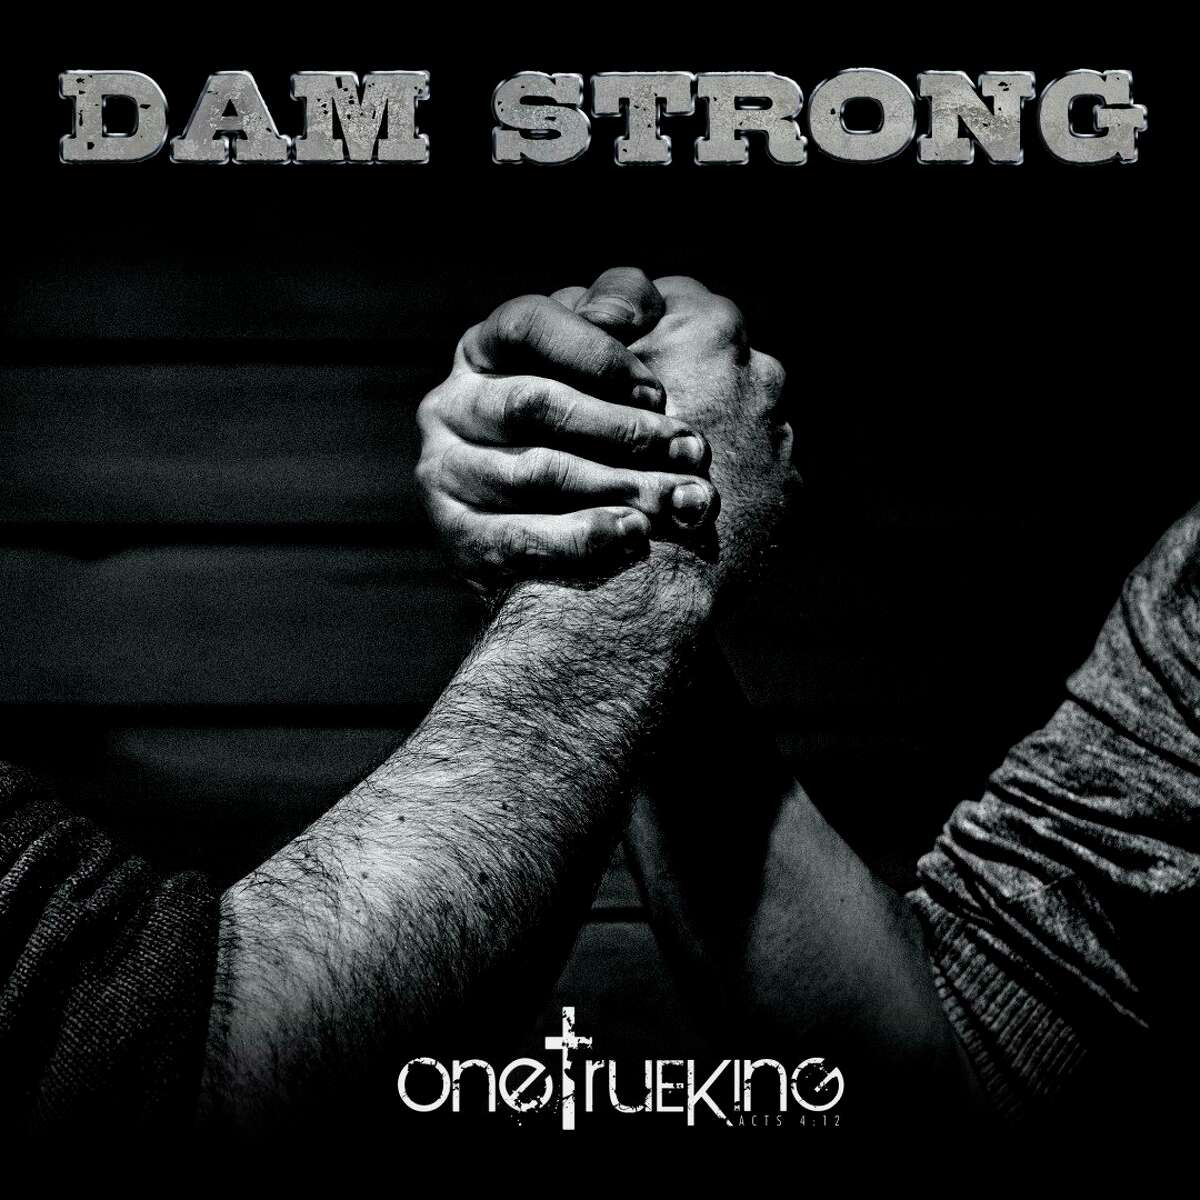 Proceeds from the sale of local band One True King's song "Dam Strong" will go to the Village of Sanford to help with rebuilding efforts.